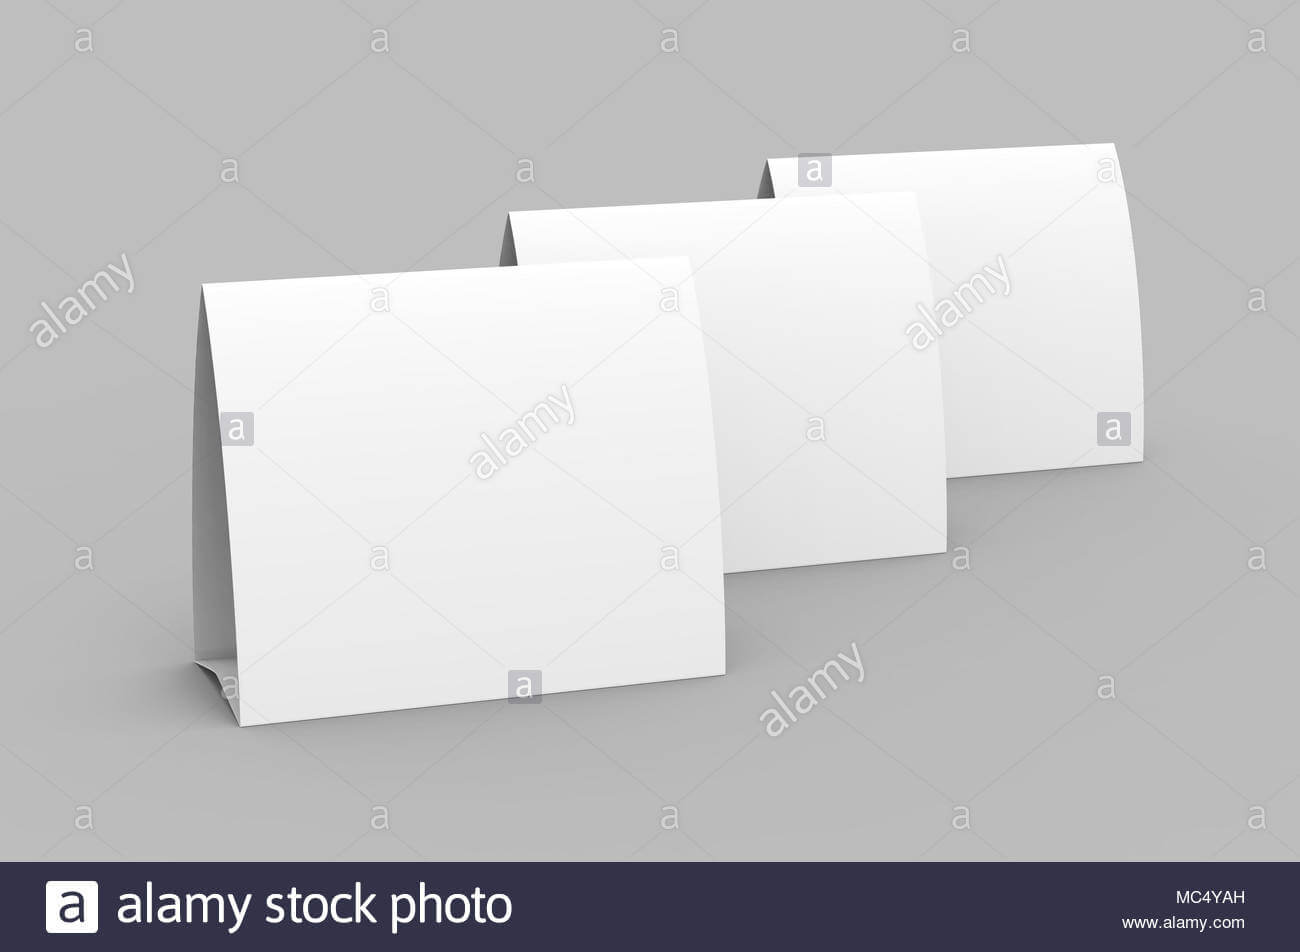 Blank Paper Tent Template, White Tent Cards Set With Empty Pertaining To Blank Tent Card Template